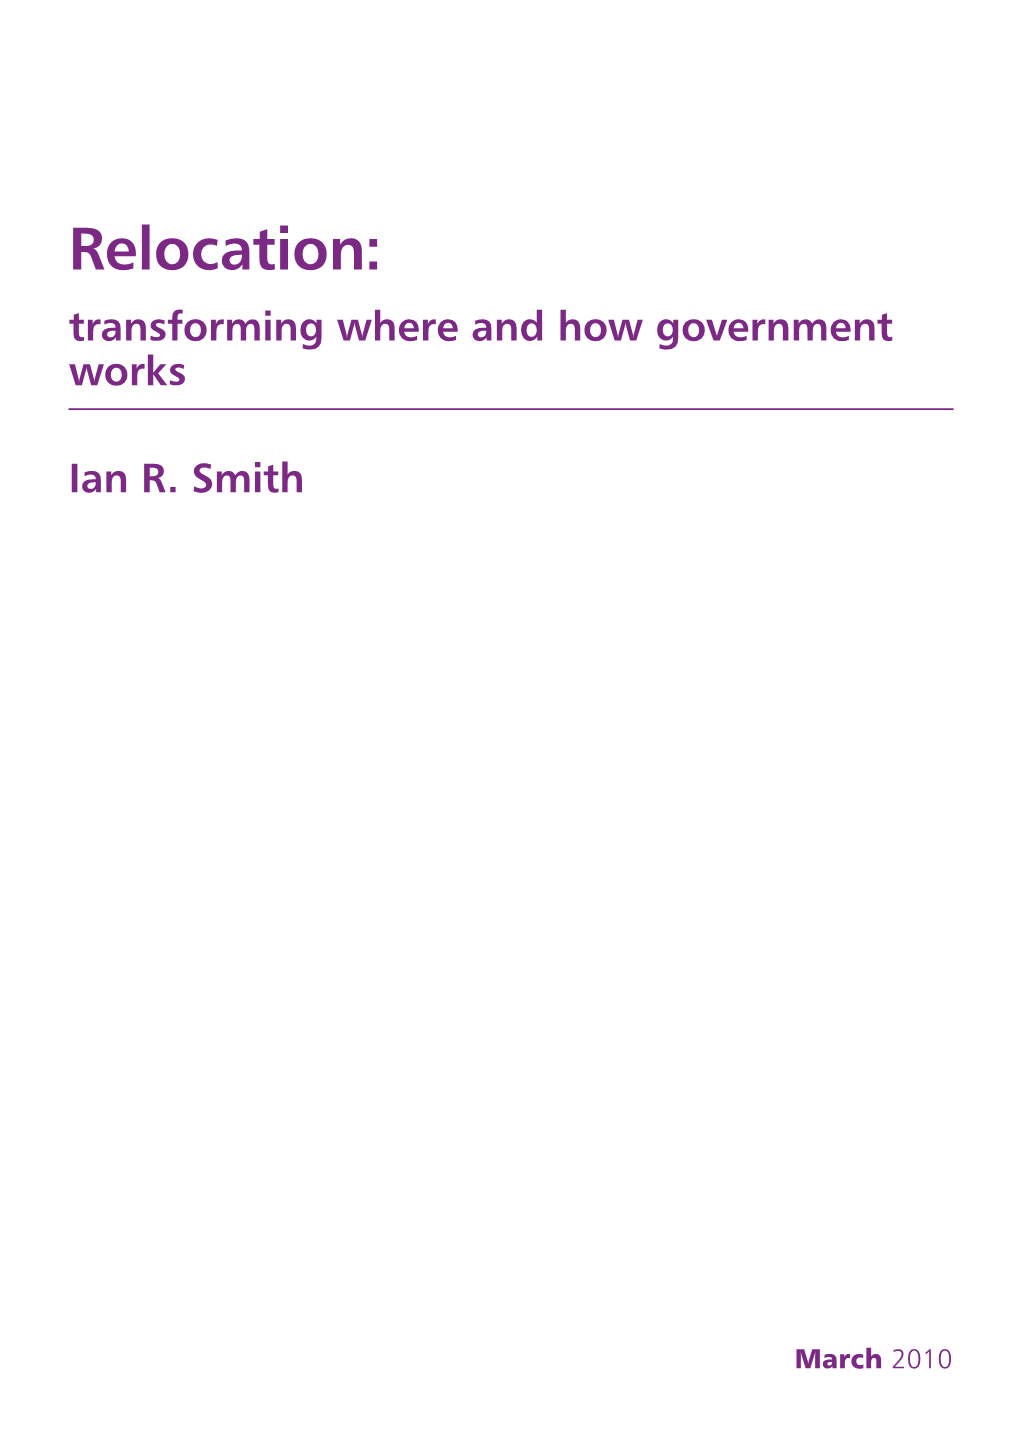 Relocation: Transforming Where and How Government Works